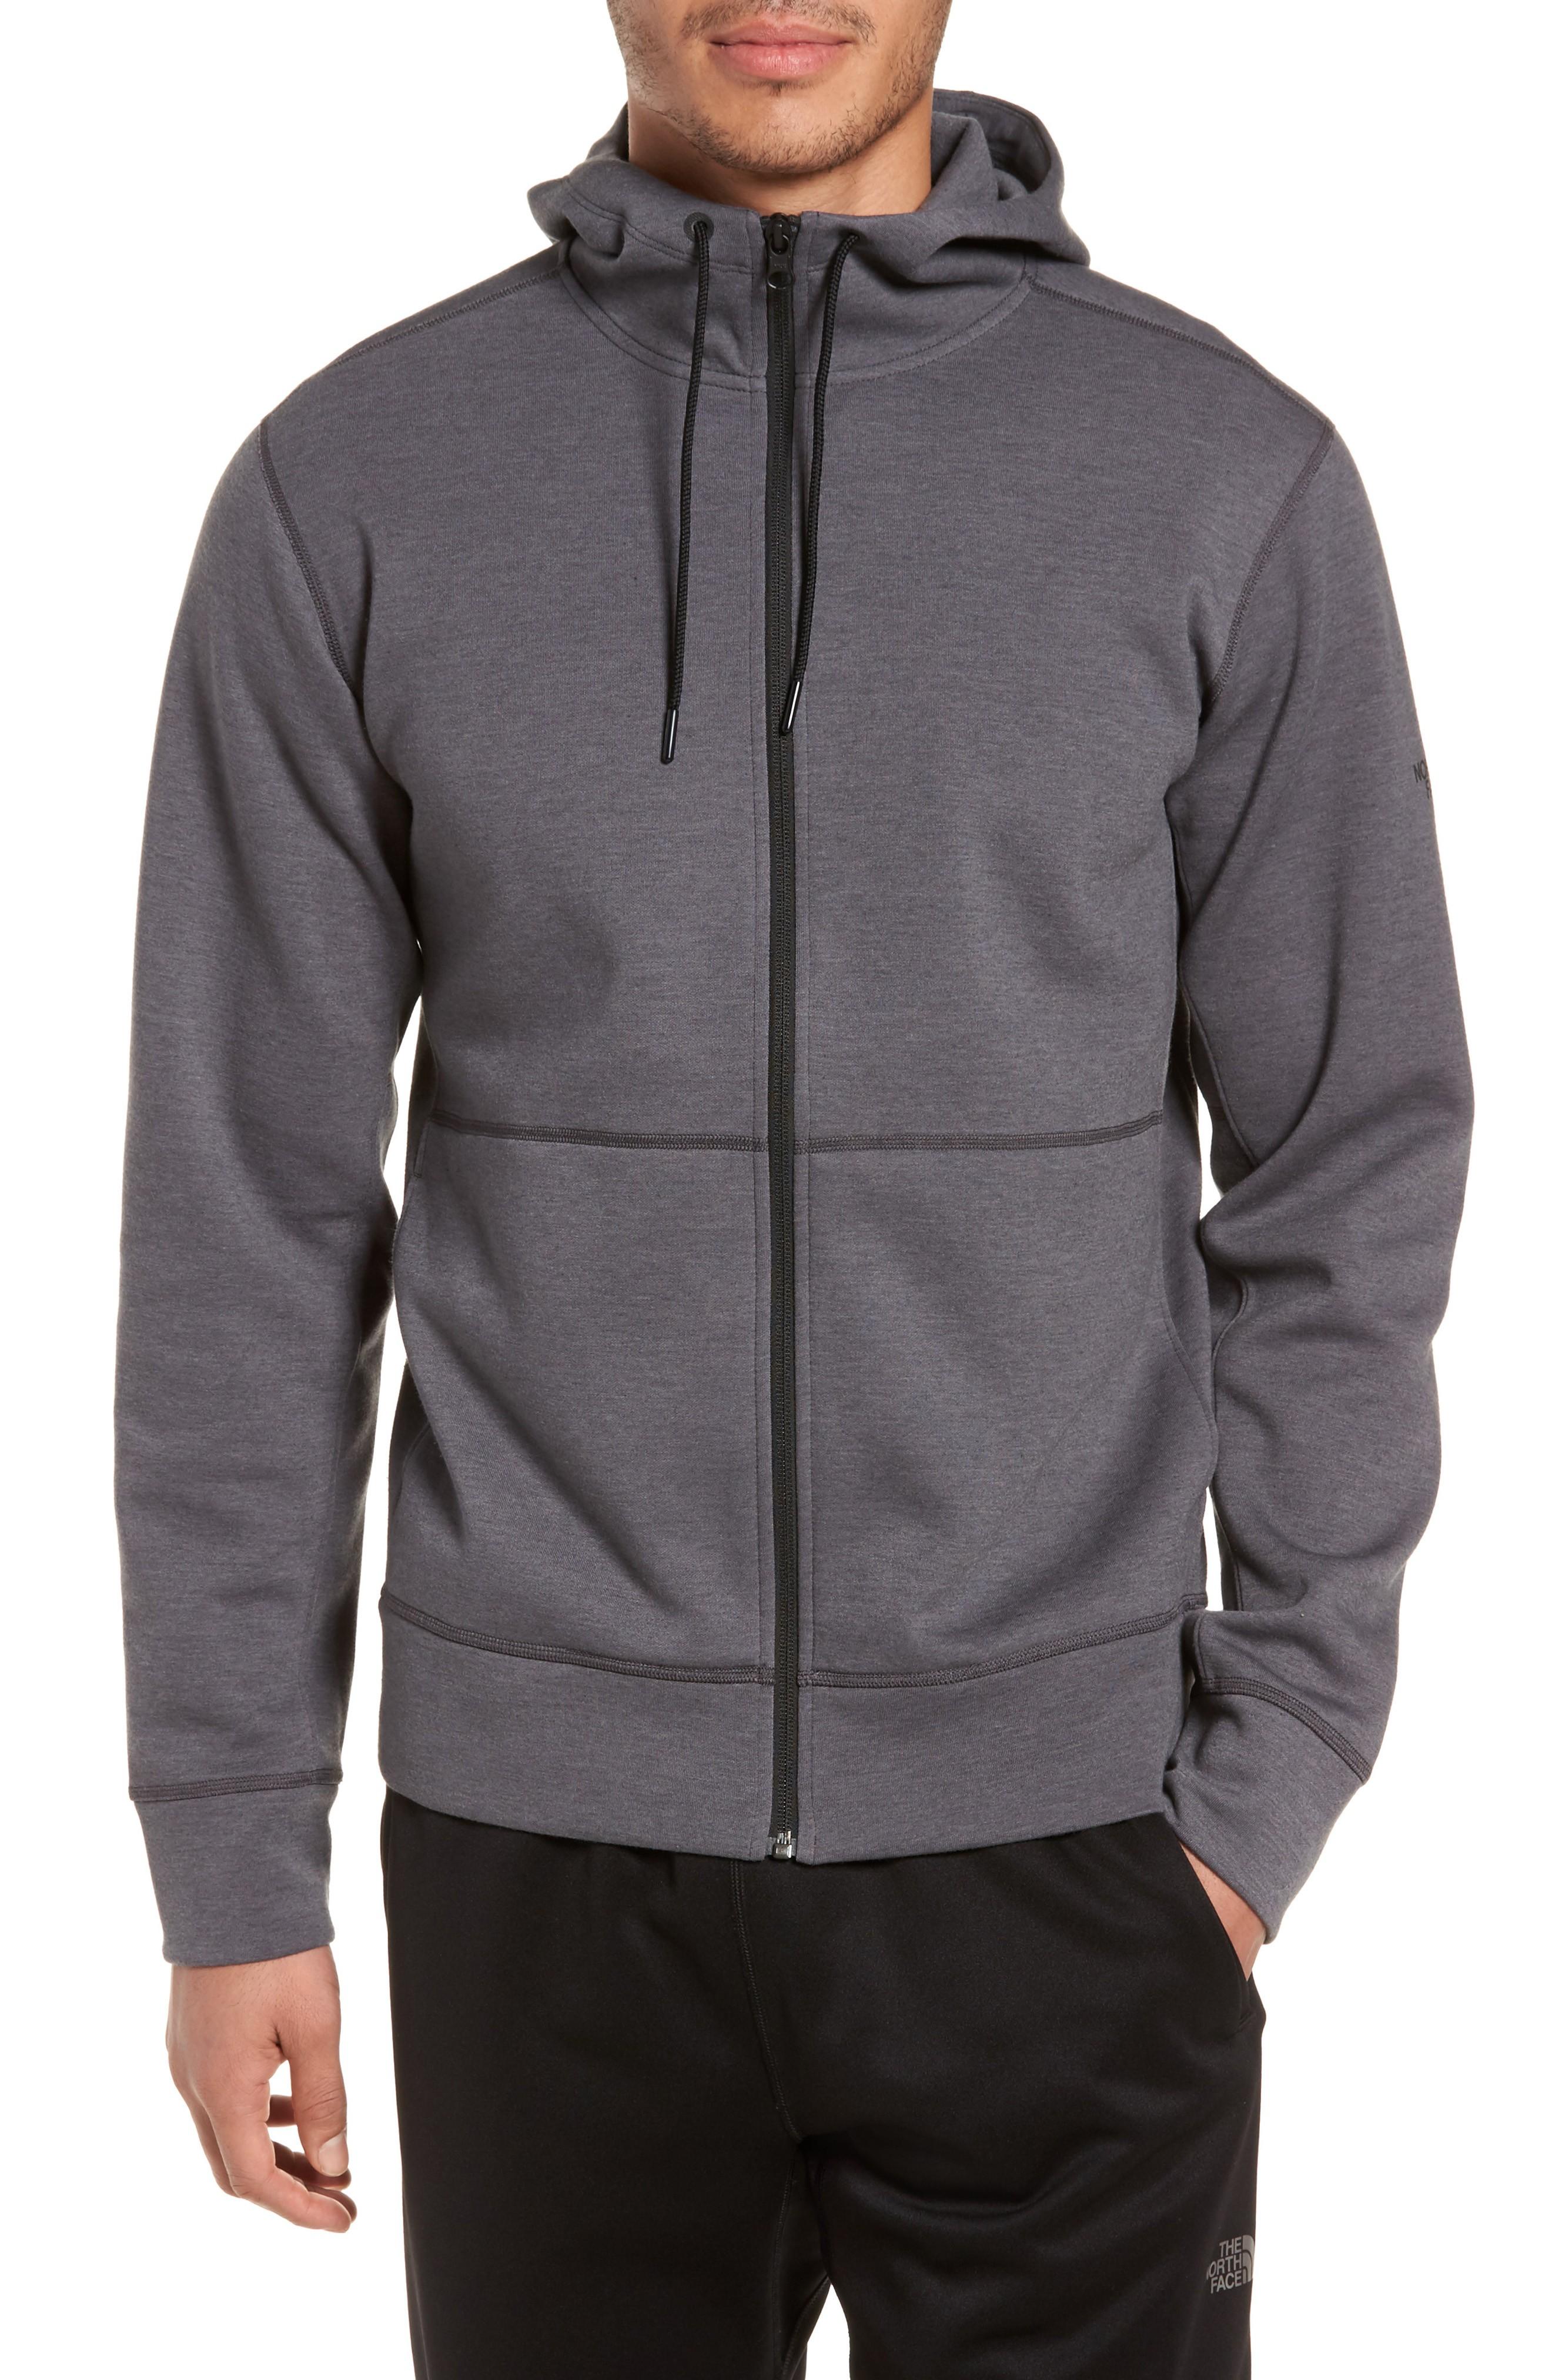 The North Face Slacker Tech Zip Hoodie In Weathered Black Heather ...